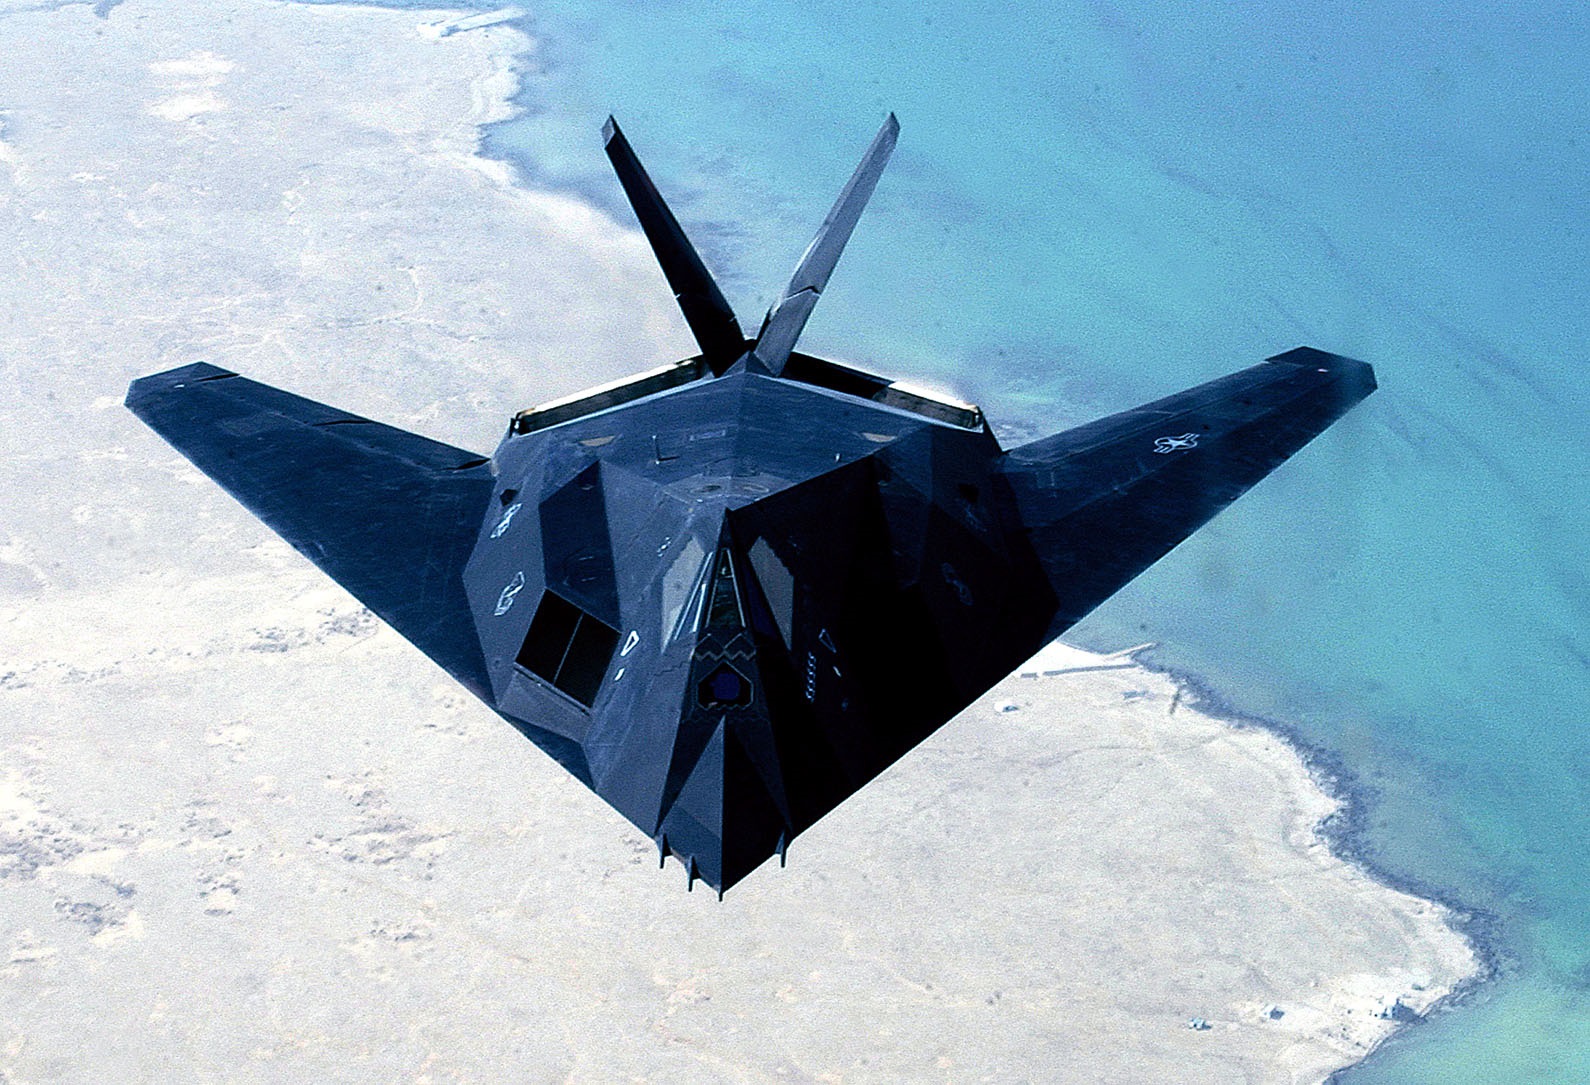 America's First Stealth Fighter: The Story of the F-117 Nighthawk | The